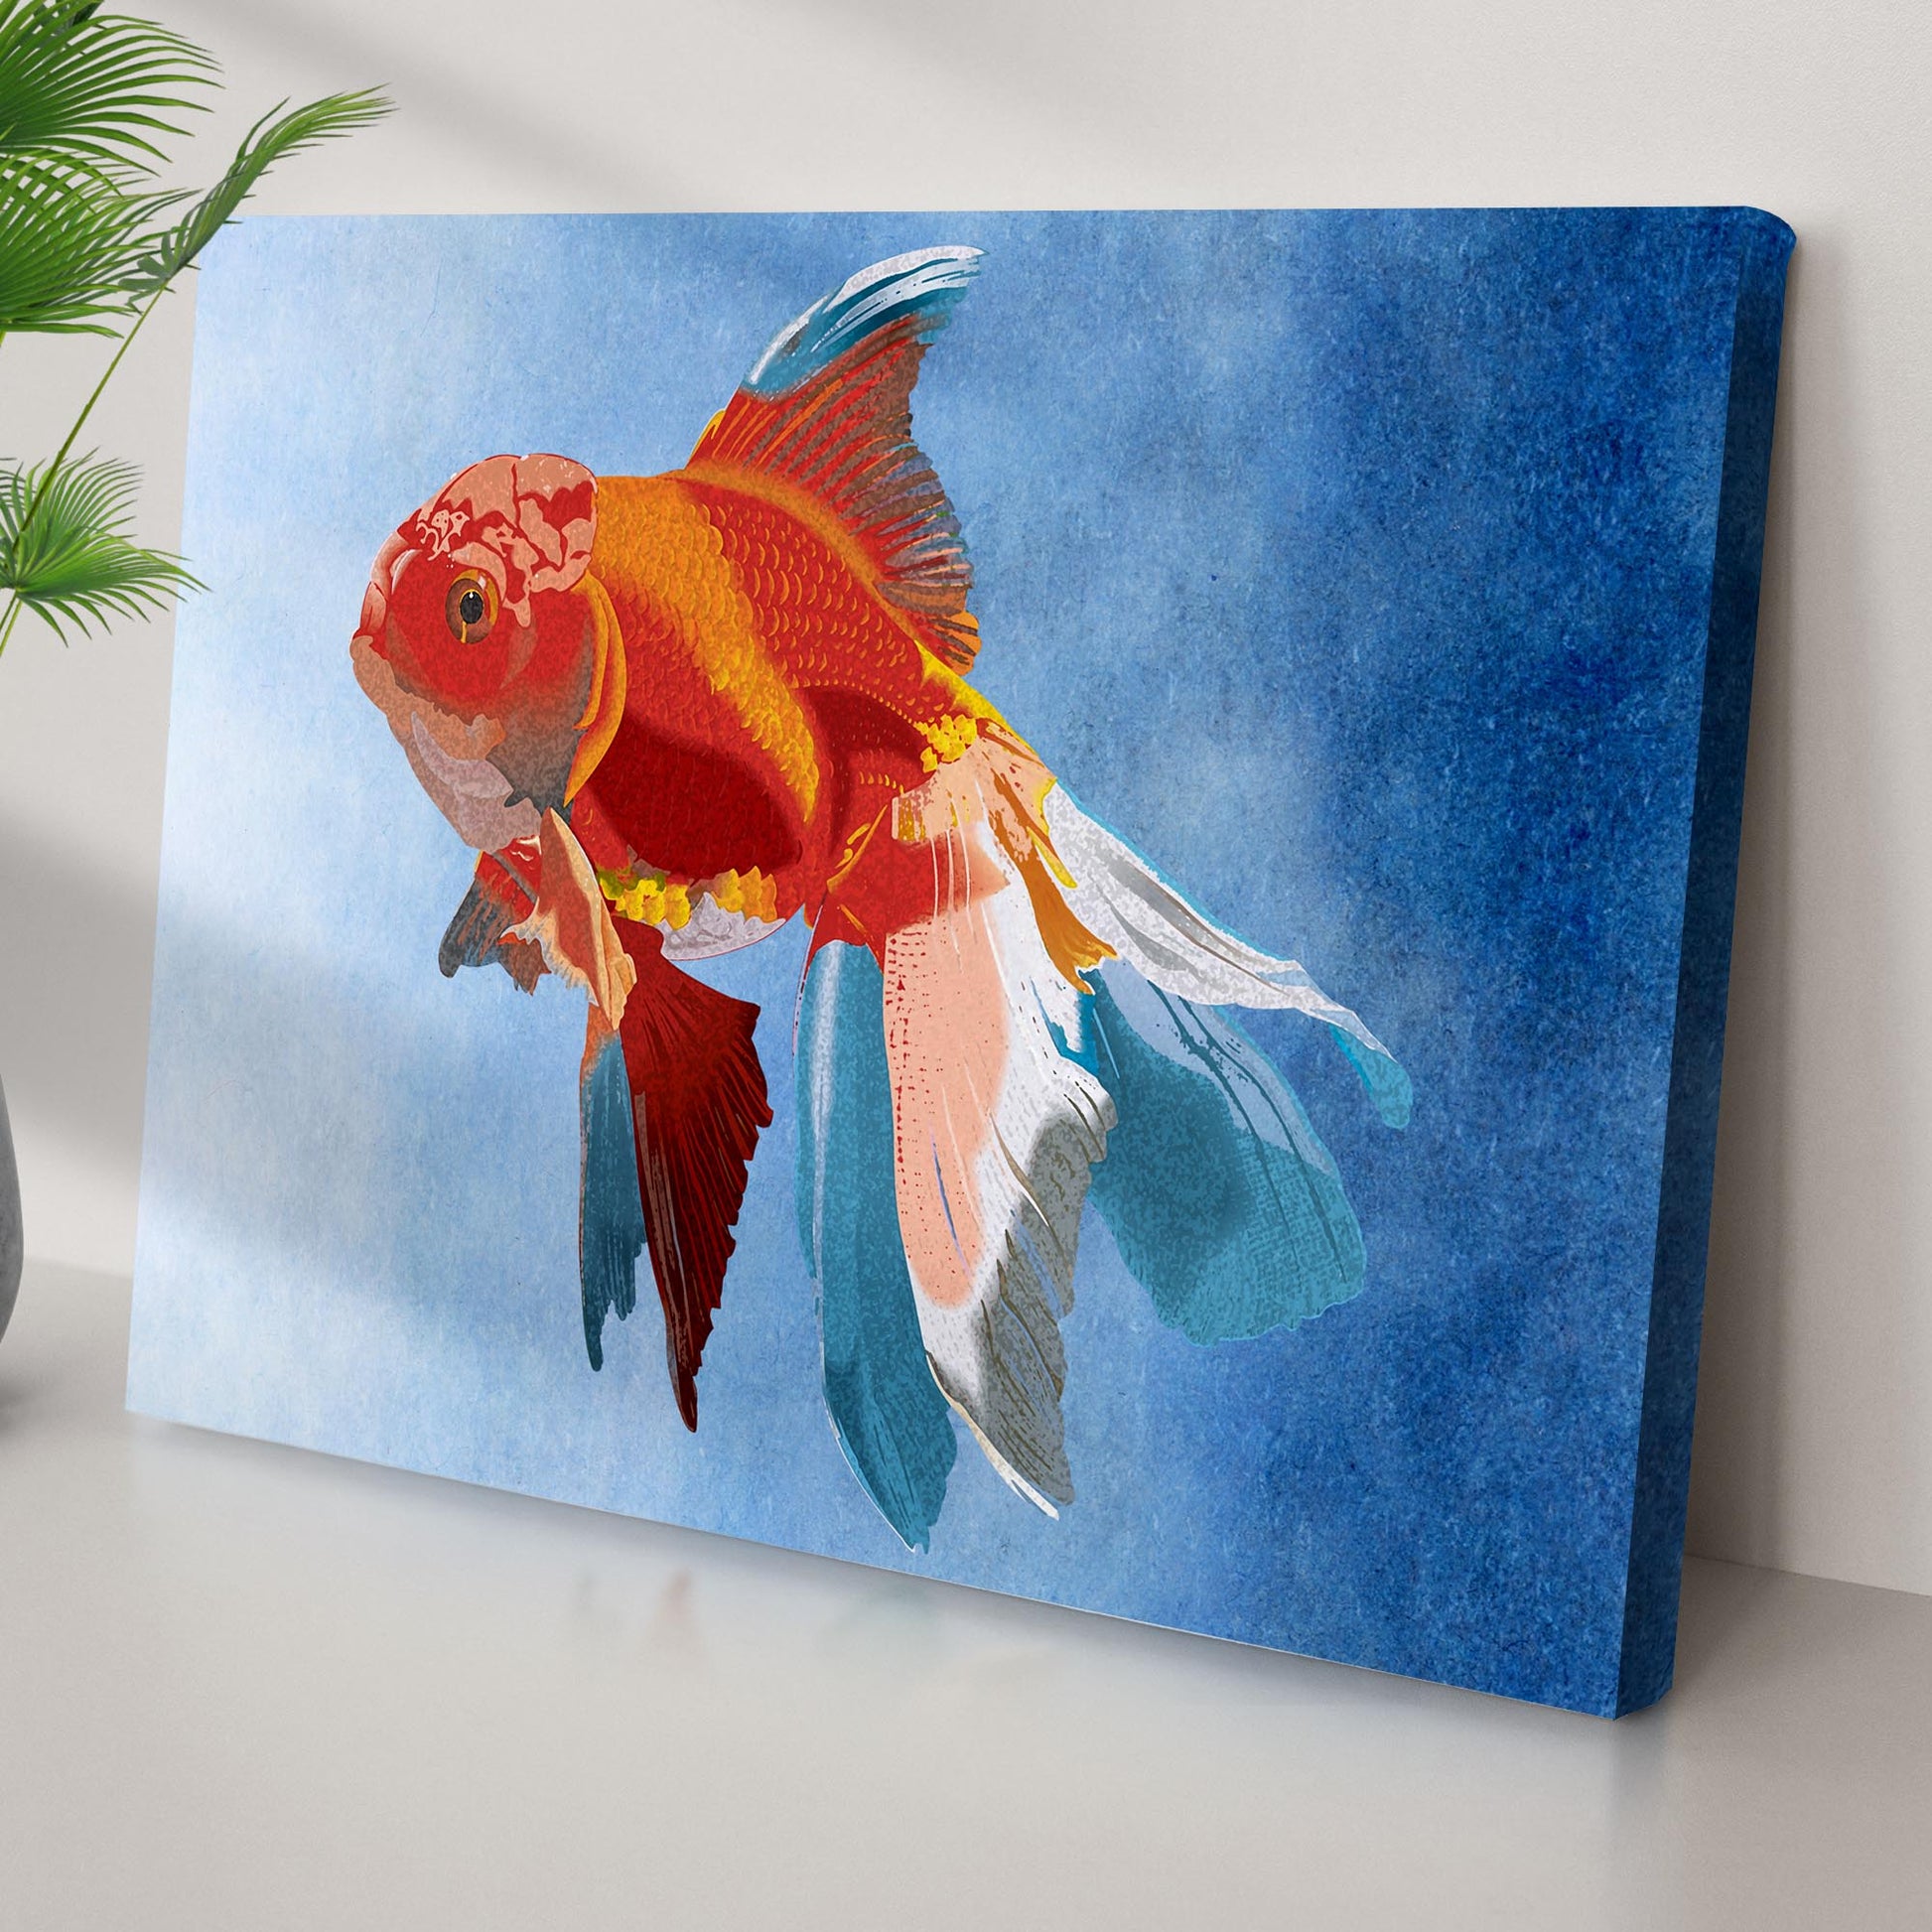 Watercolor Goldfish Canvas Wall Art Style 1 - Image by Tailored Canvases